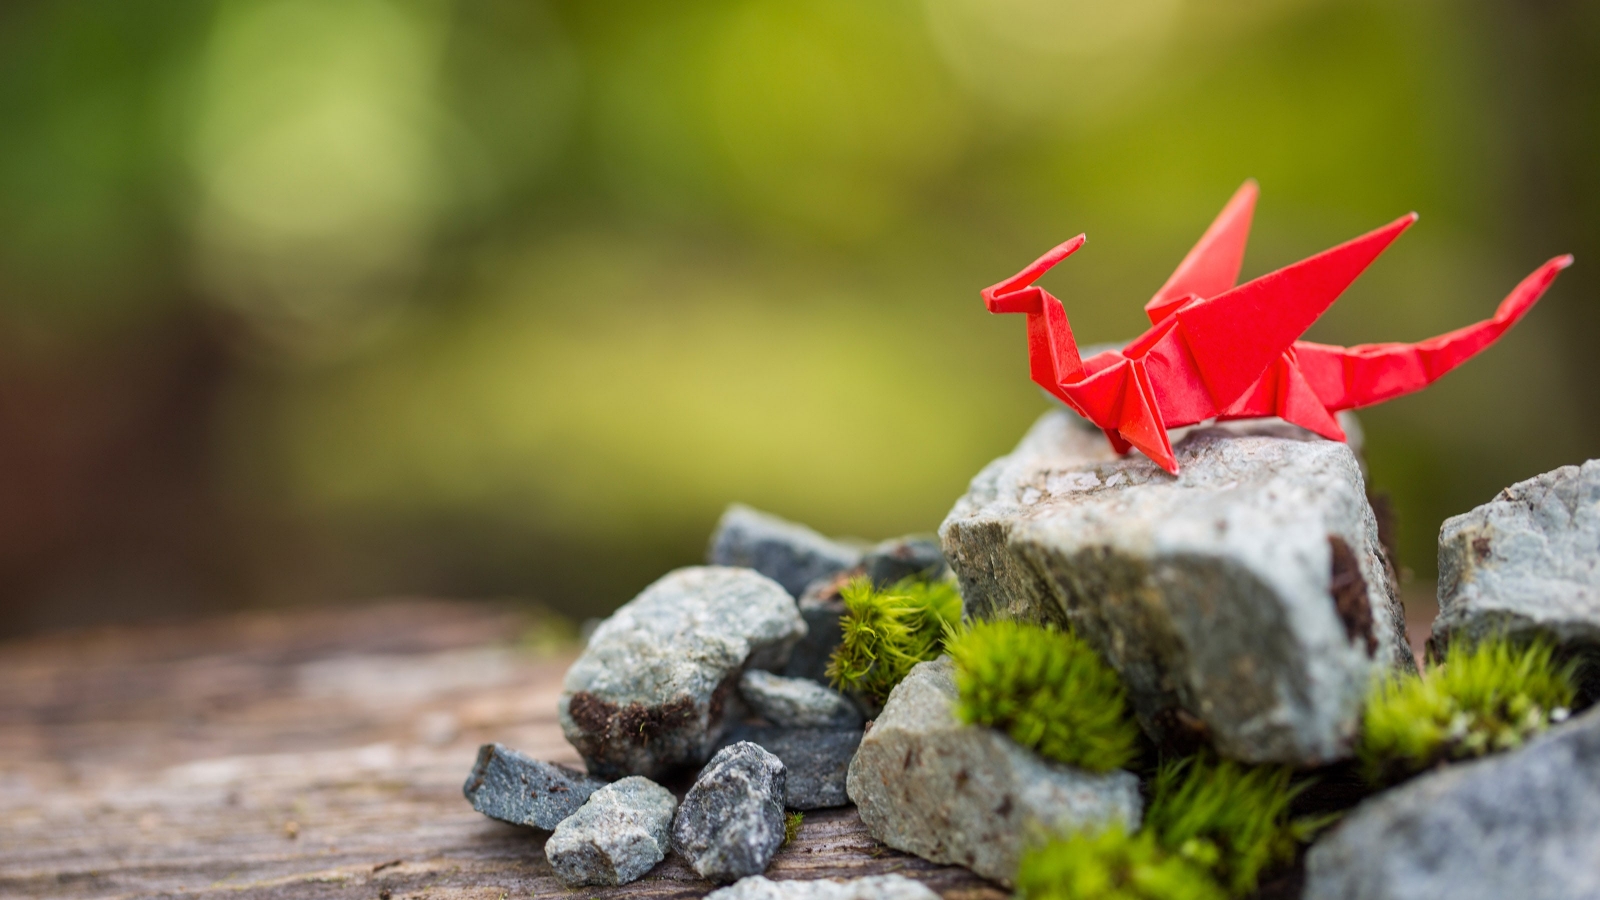 A dragon crafted from red origami paper sitting on a mossy rock.